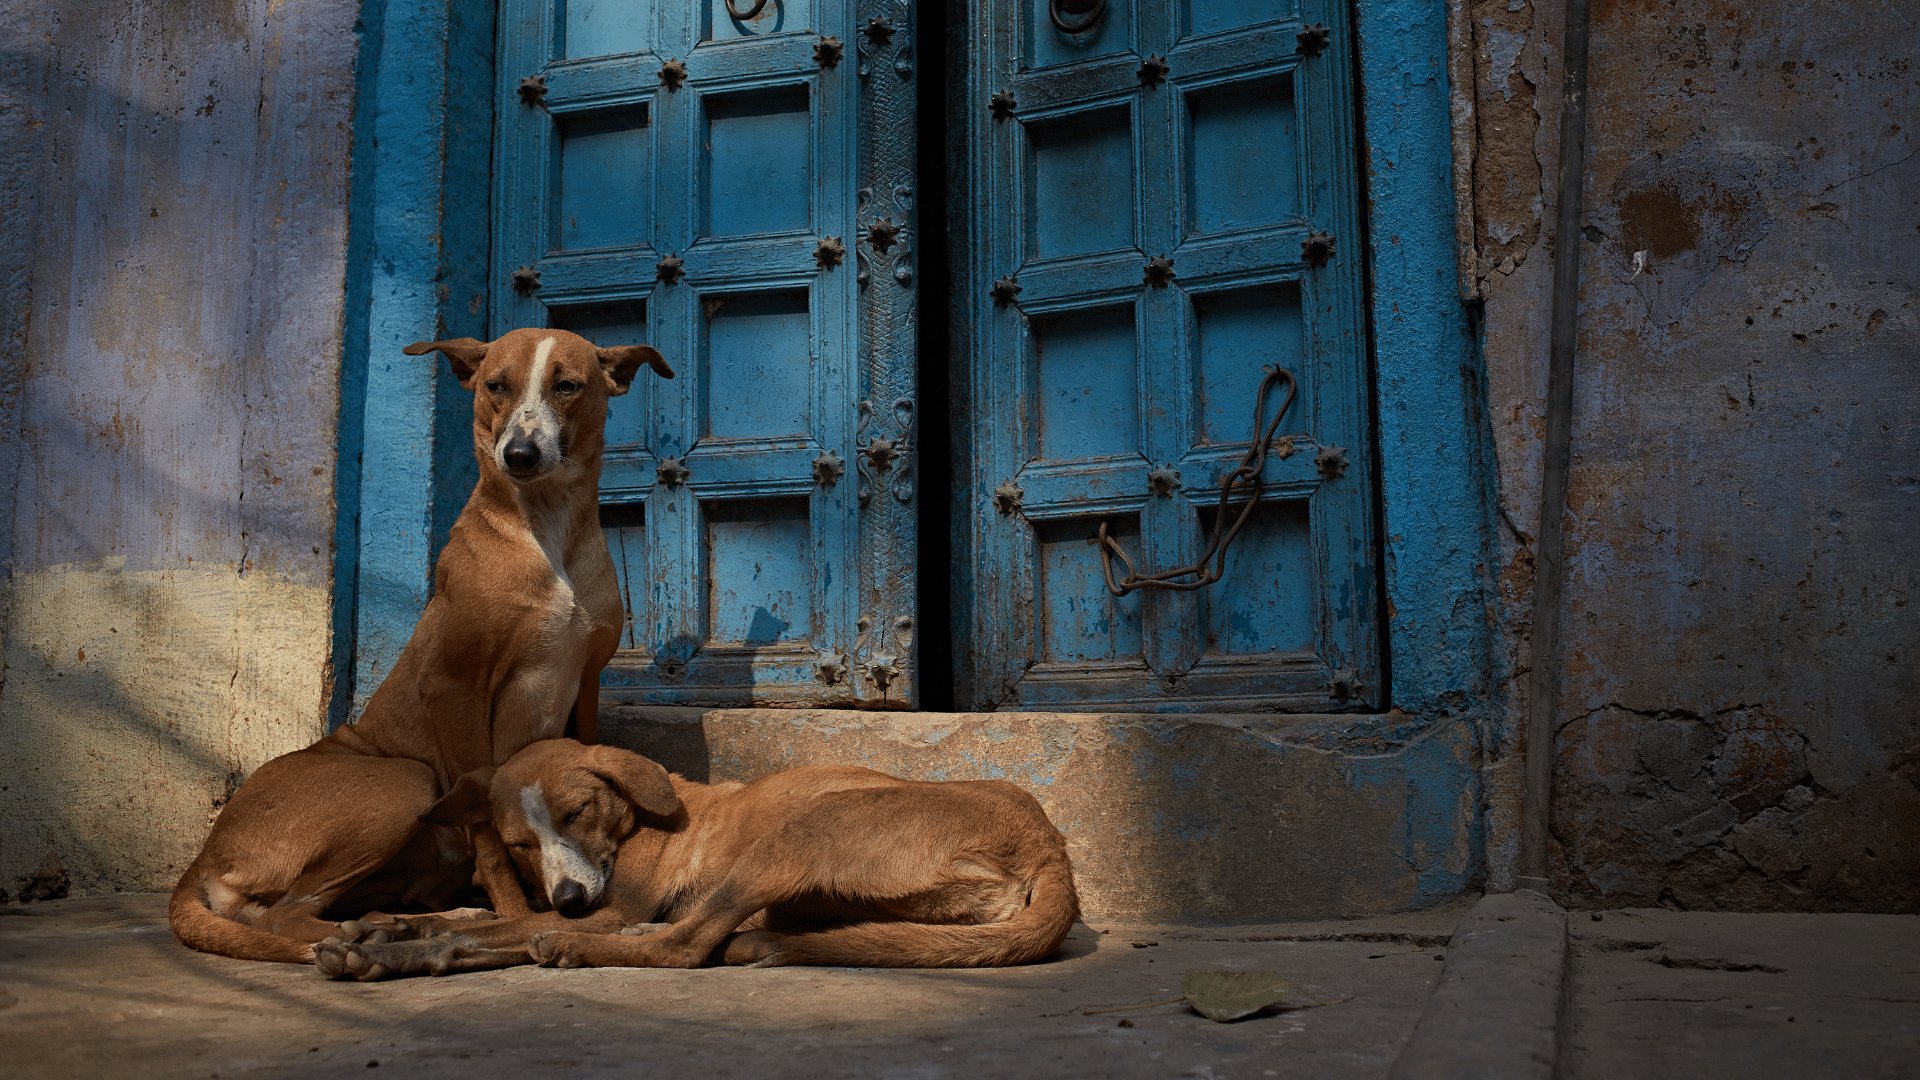 <div class="paragraphs"><p>India Has a Stray Dogs Problem, But What's the Bone of Contention?</p></div>